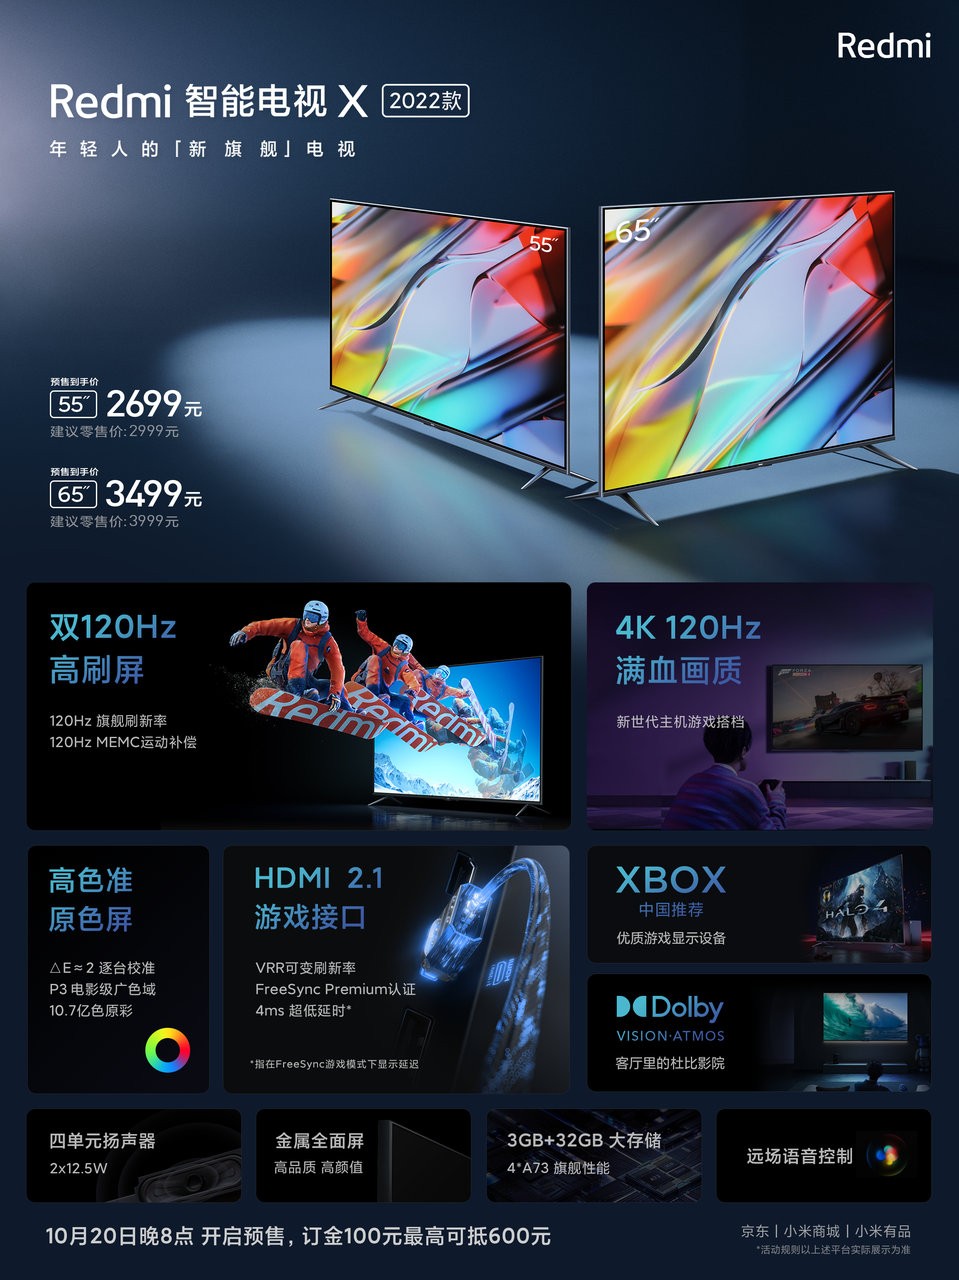 Two Redmi Smart TV X 2022 models unveiled, 55'' and 65'', both with 120 Hz displays